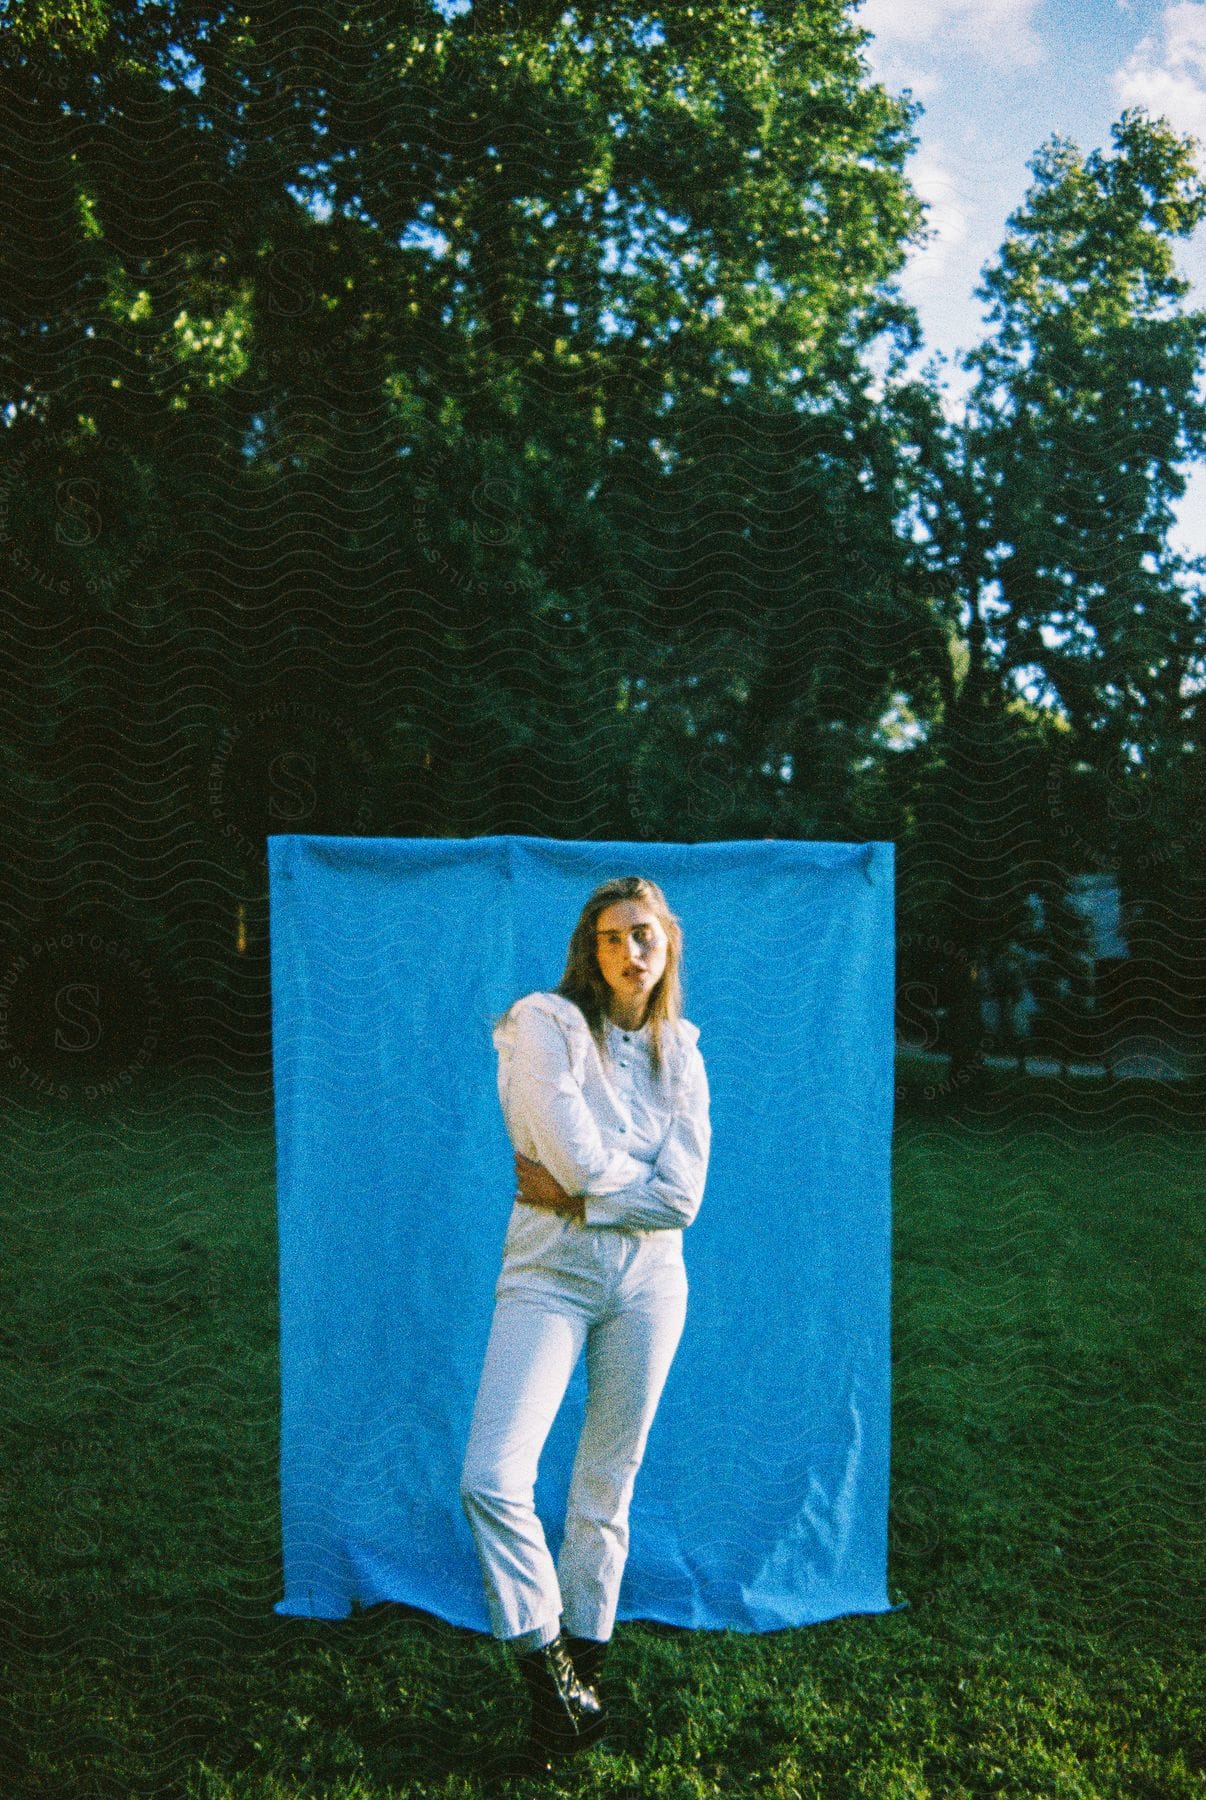 A women is standing in front of a blue blanket that is hanging up outside.